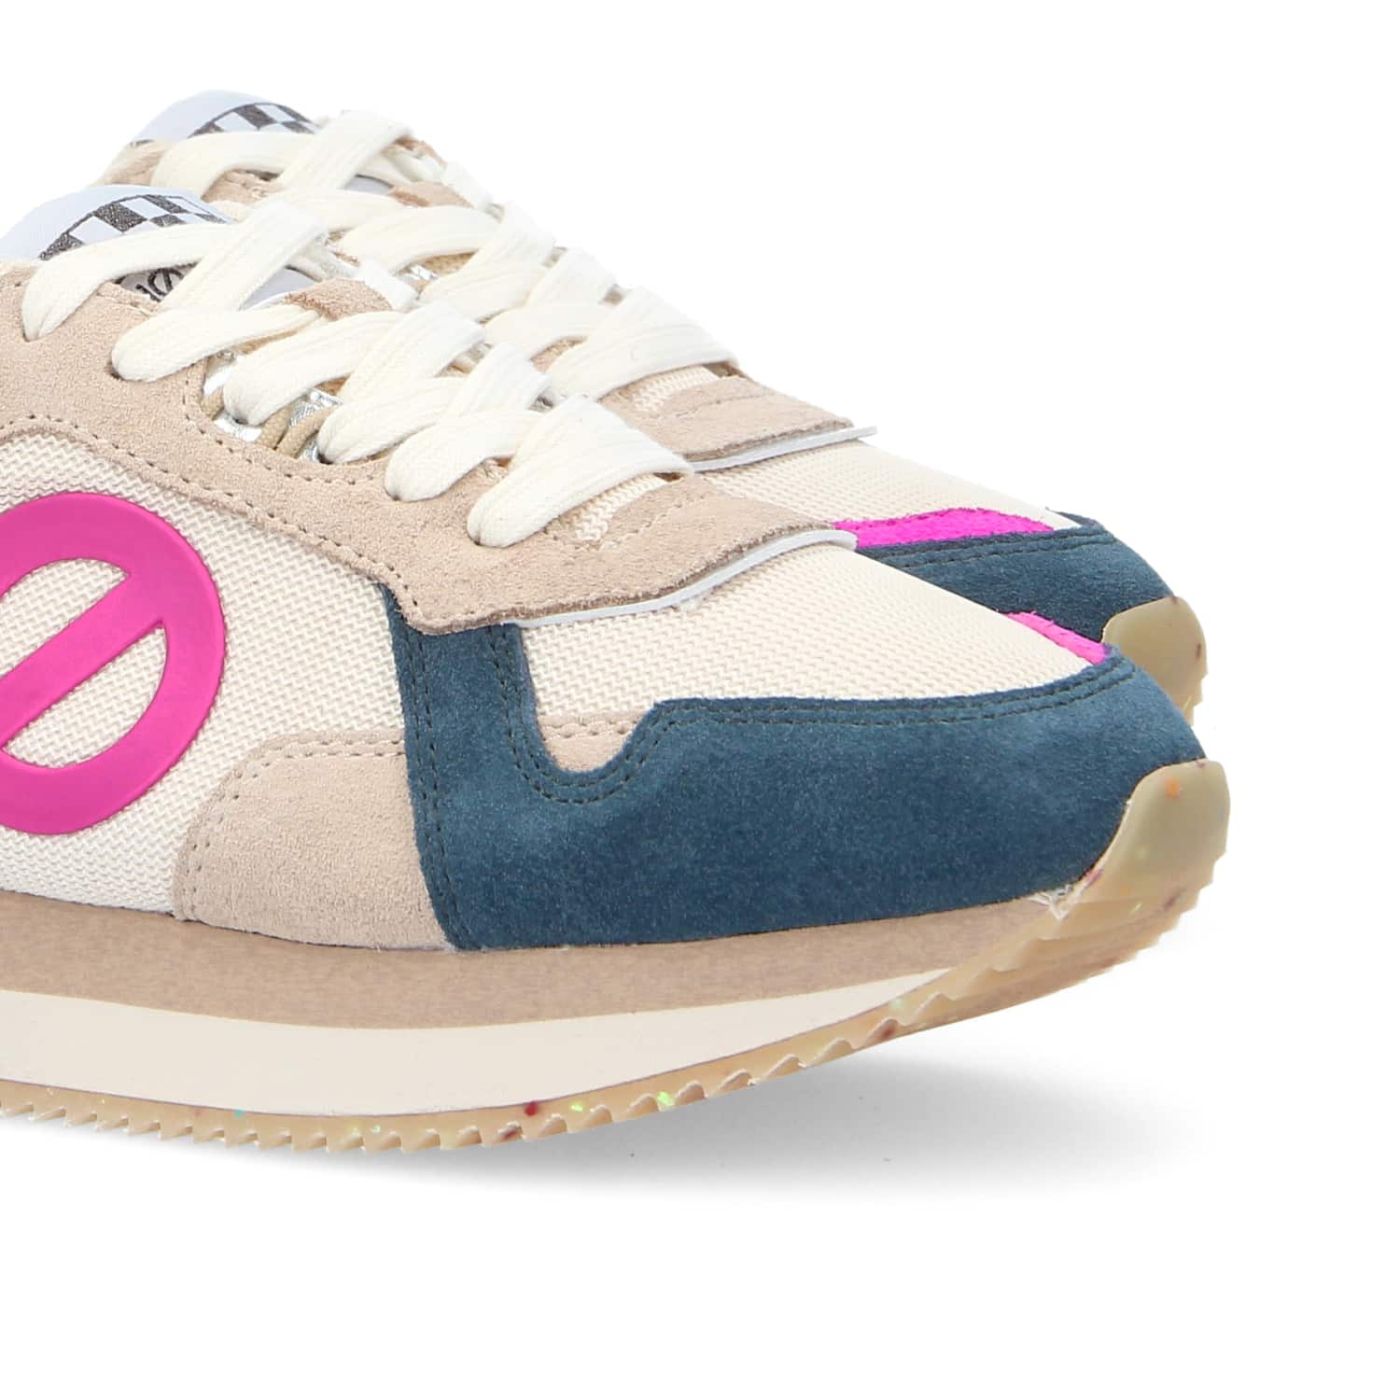 MIA JOGGER W - SUEDE/KNIT/SUED - PETROL/DOVE/F.PINK